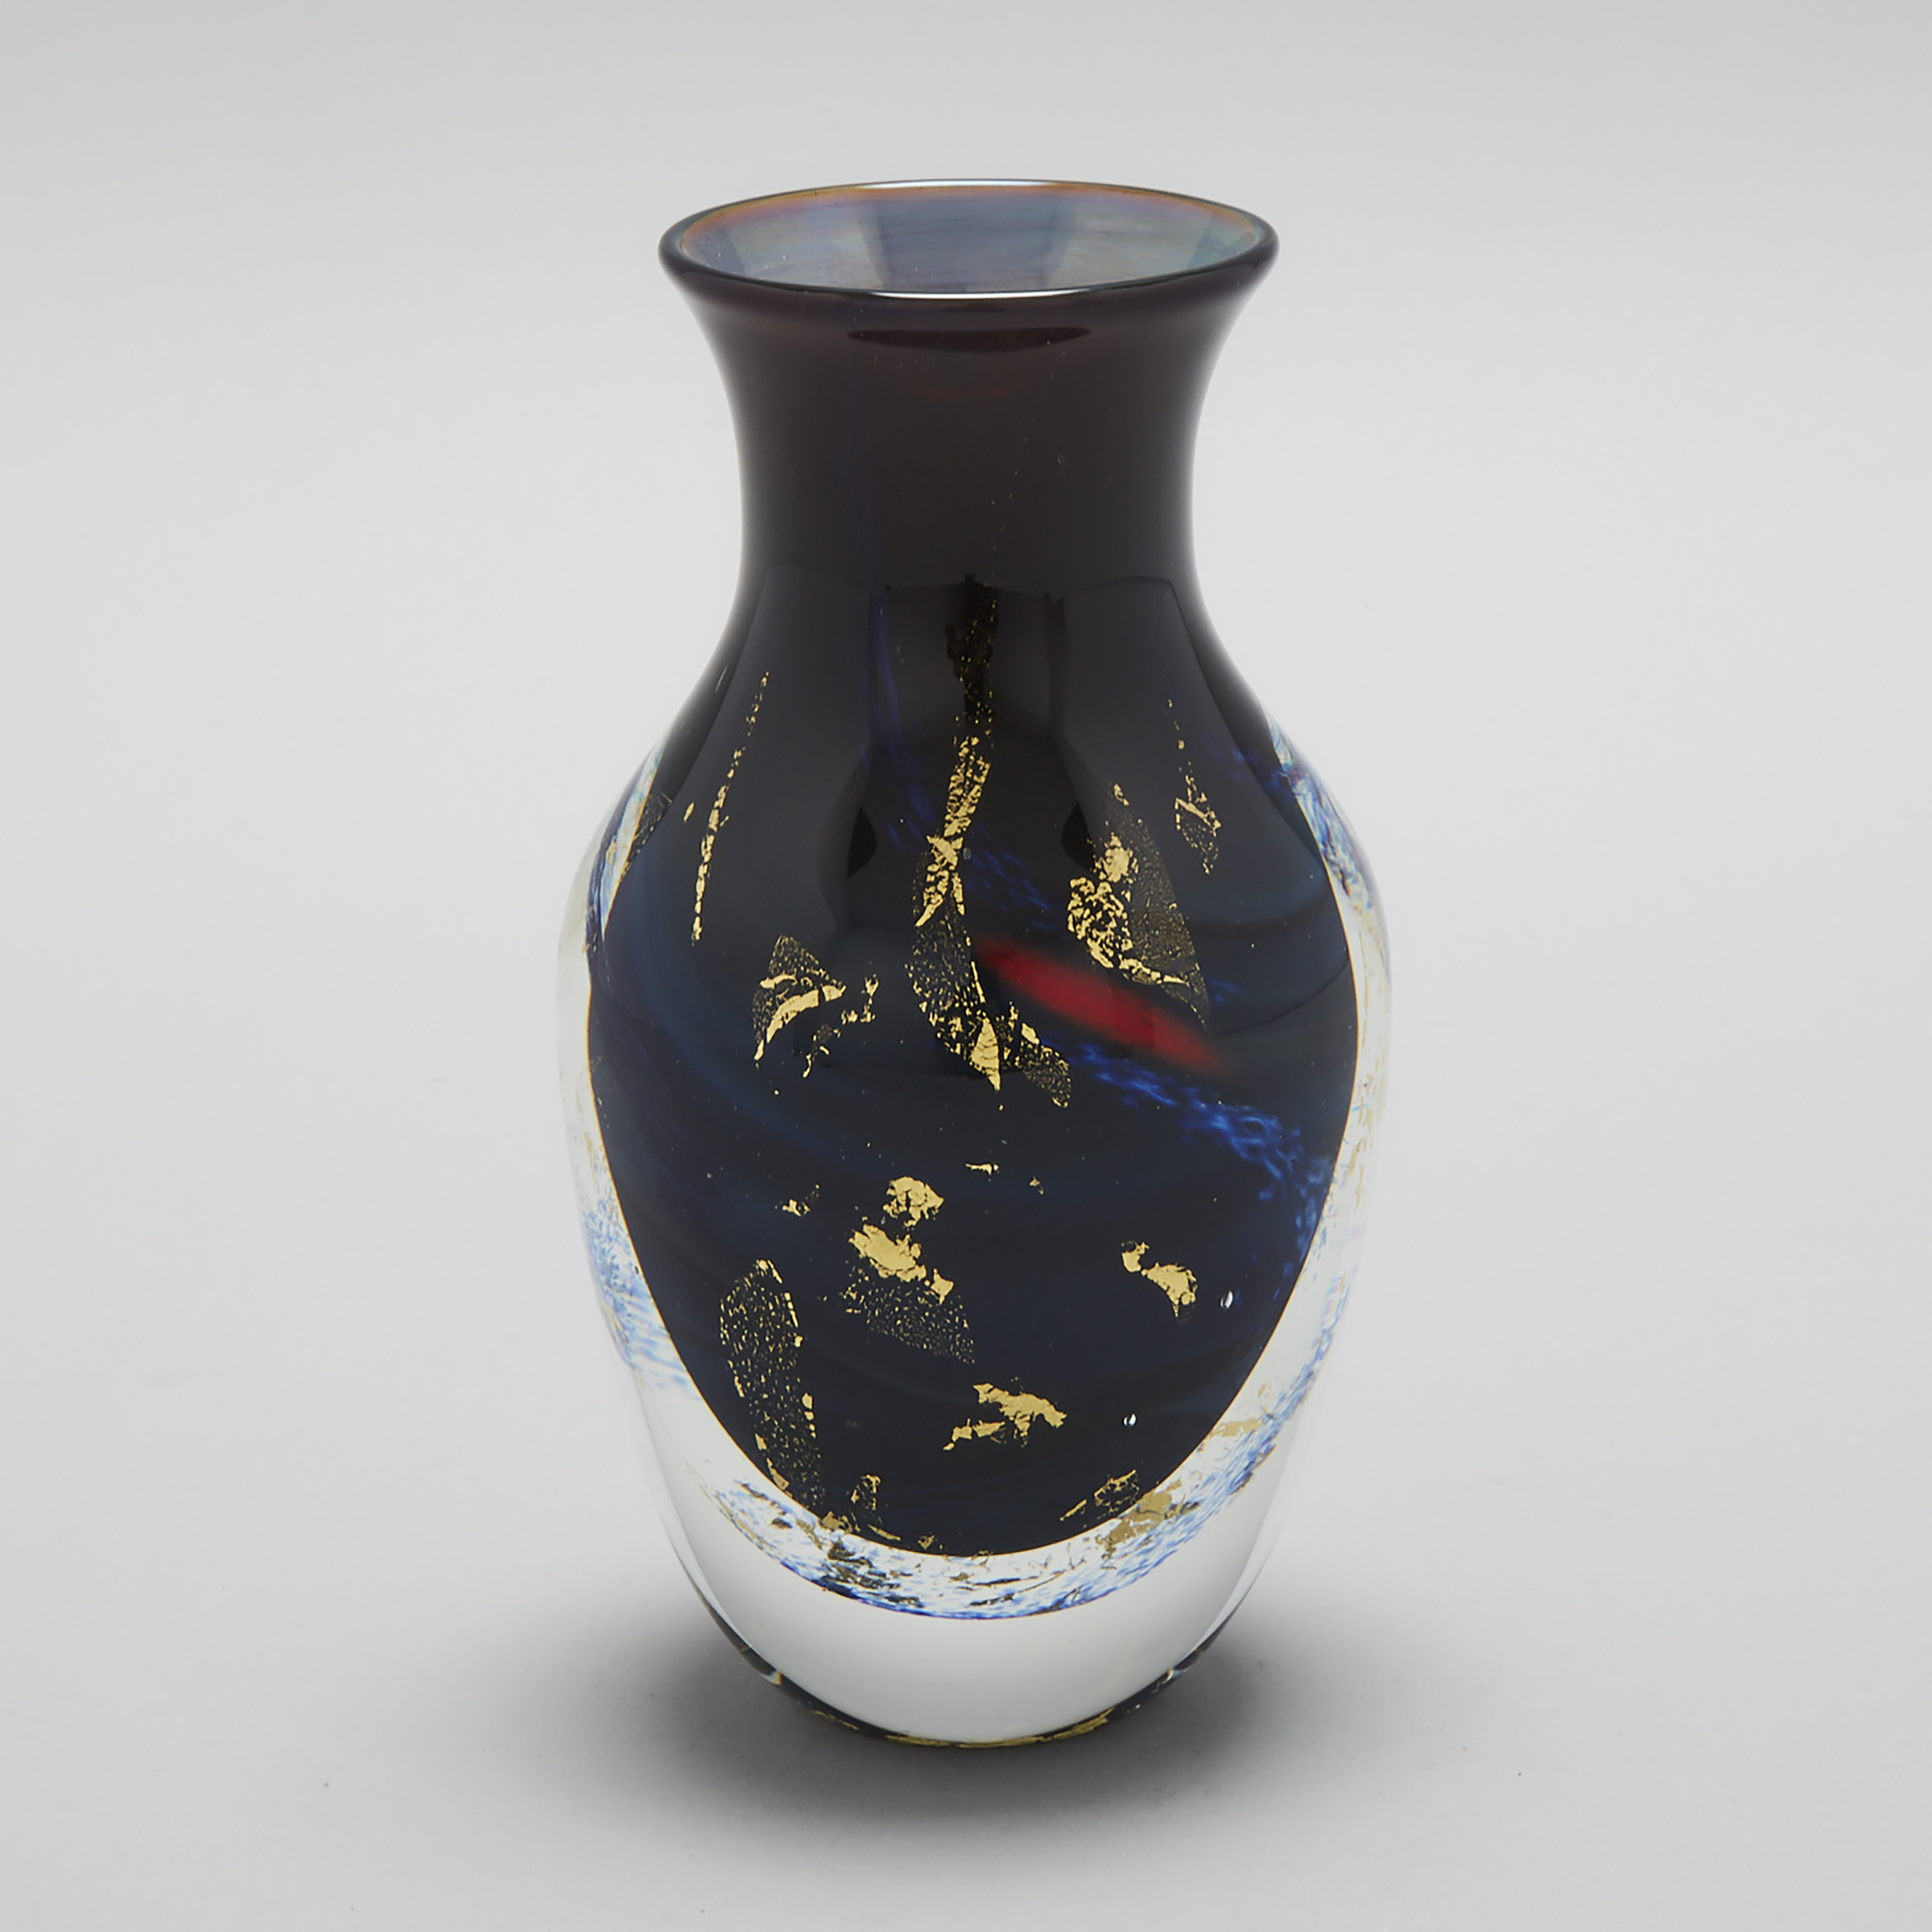 Toan Klein (American/Canadian, b.1949), Internally Decorated Glass Vase, 1987